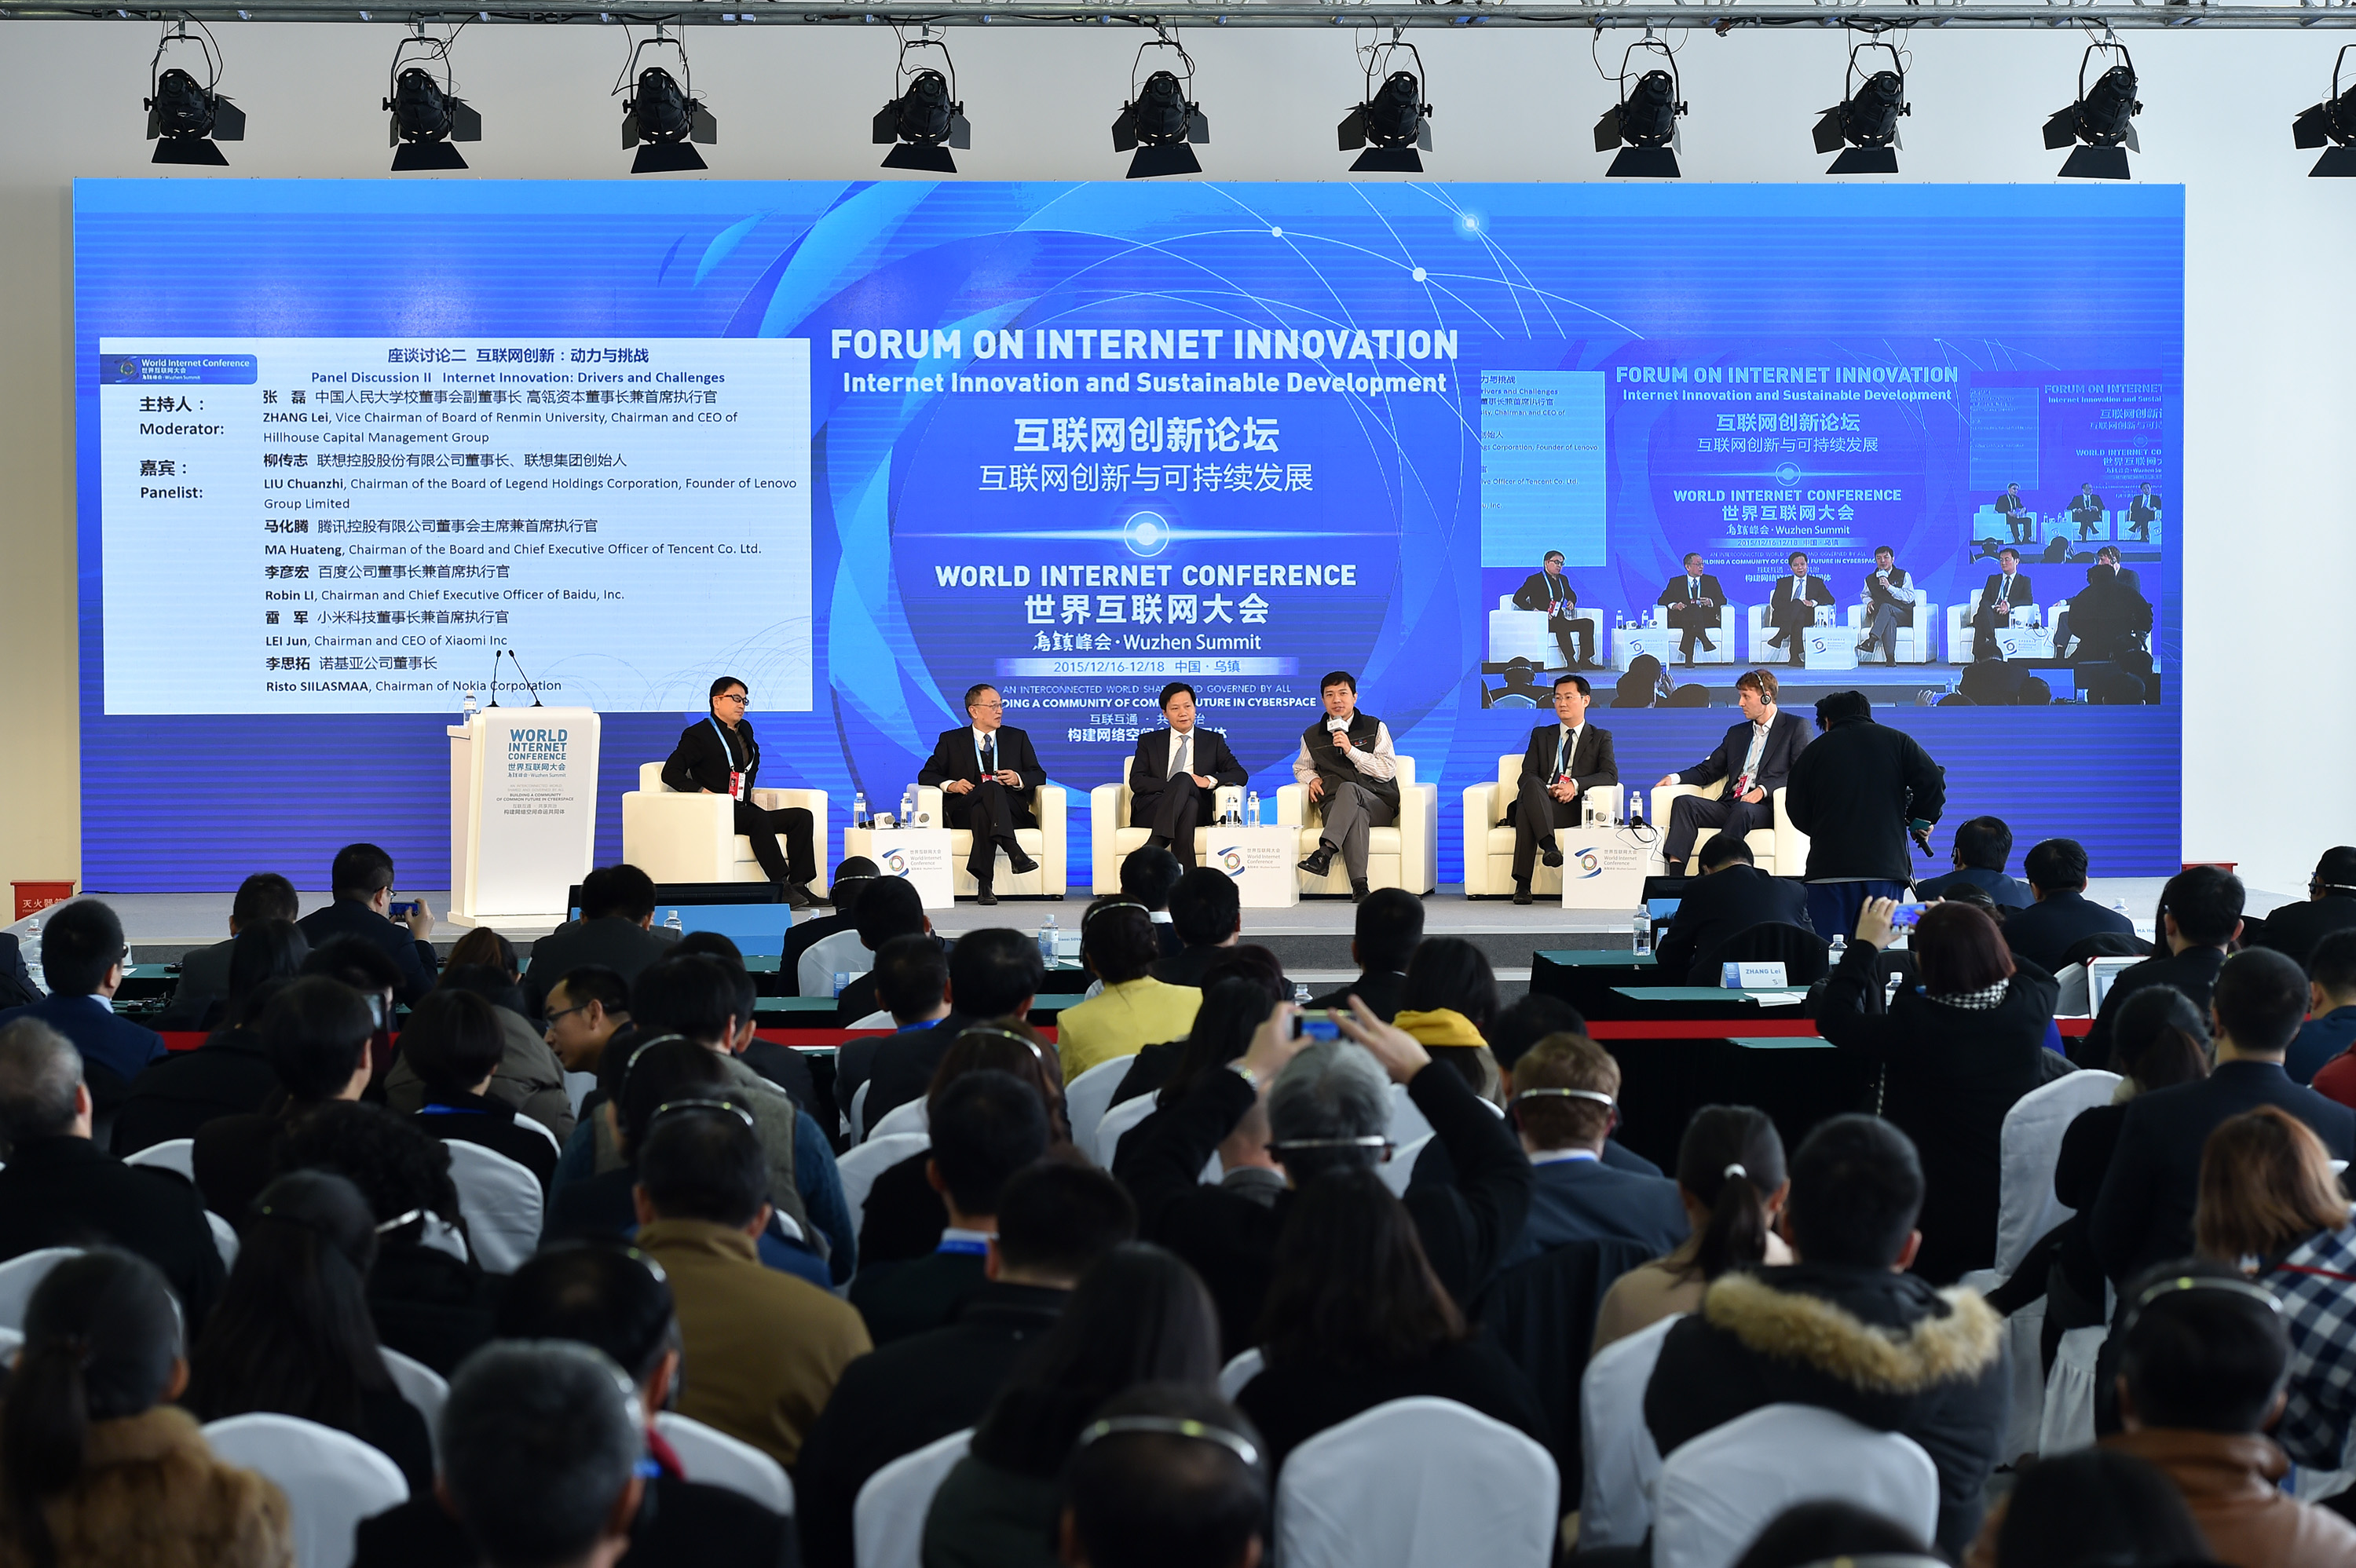 A forum on Internet innovation is held during the 2015 World Internet Conference in Wuzhen, Zhejiang. Photo: Xinhua